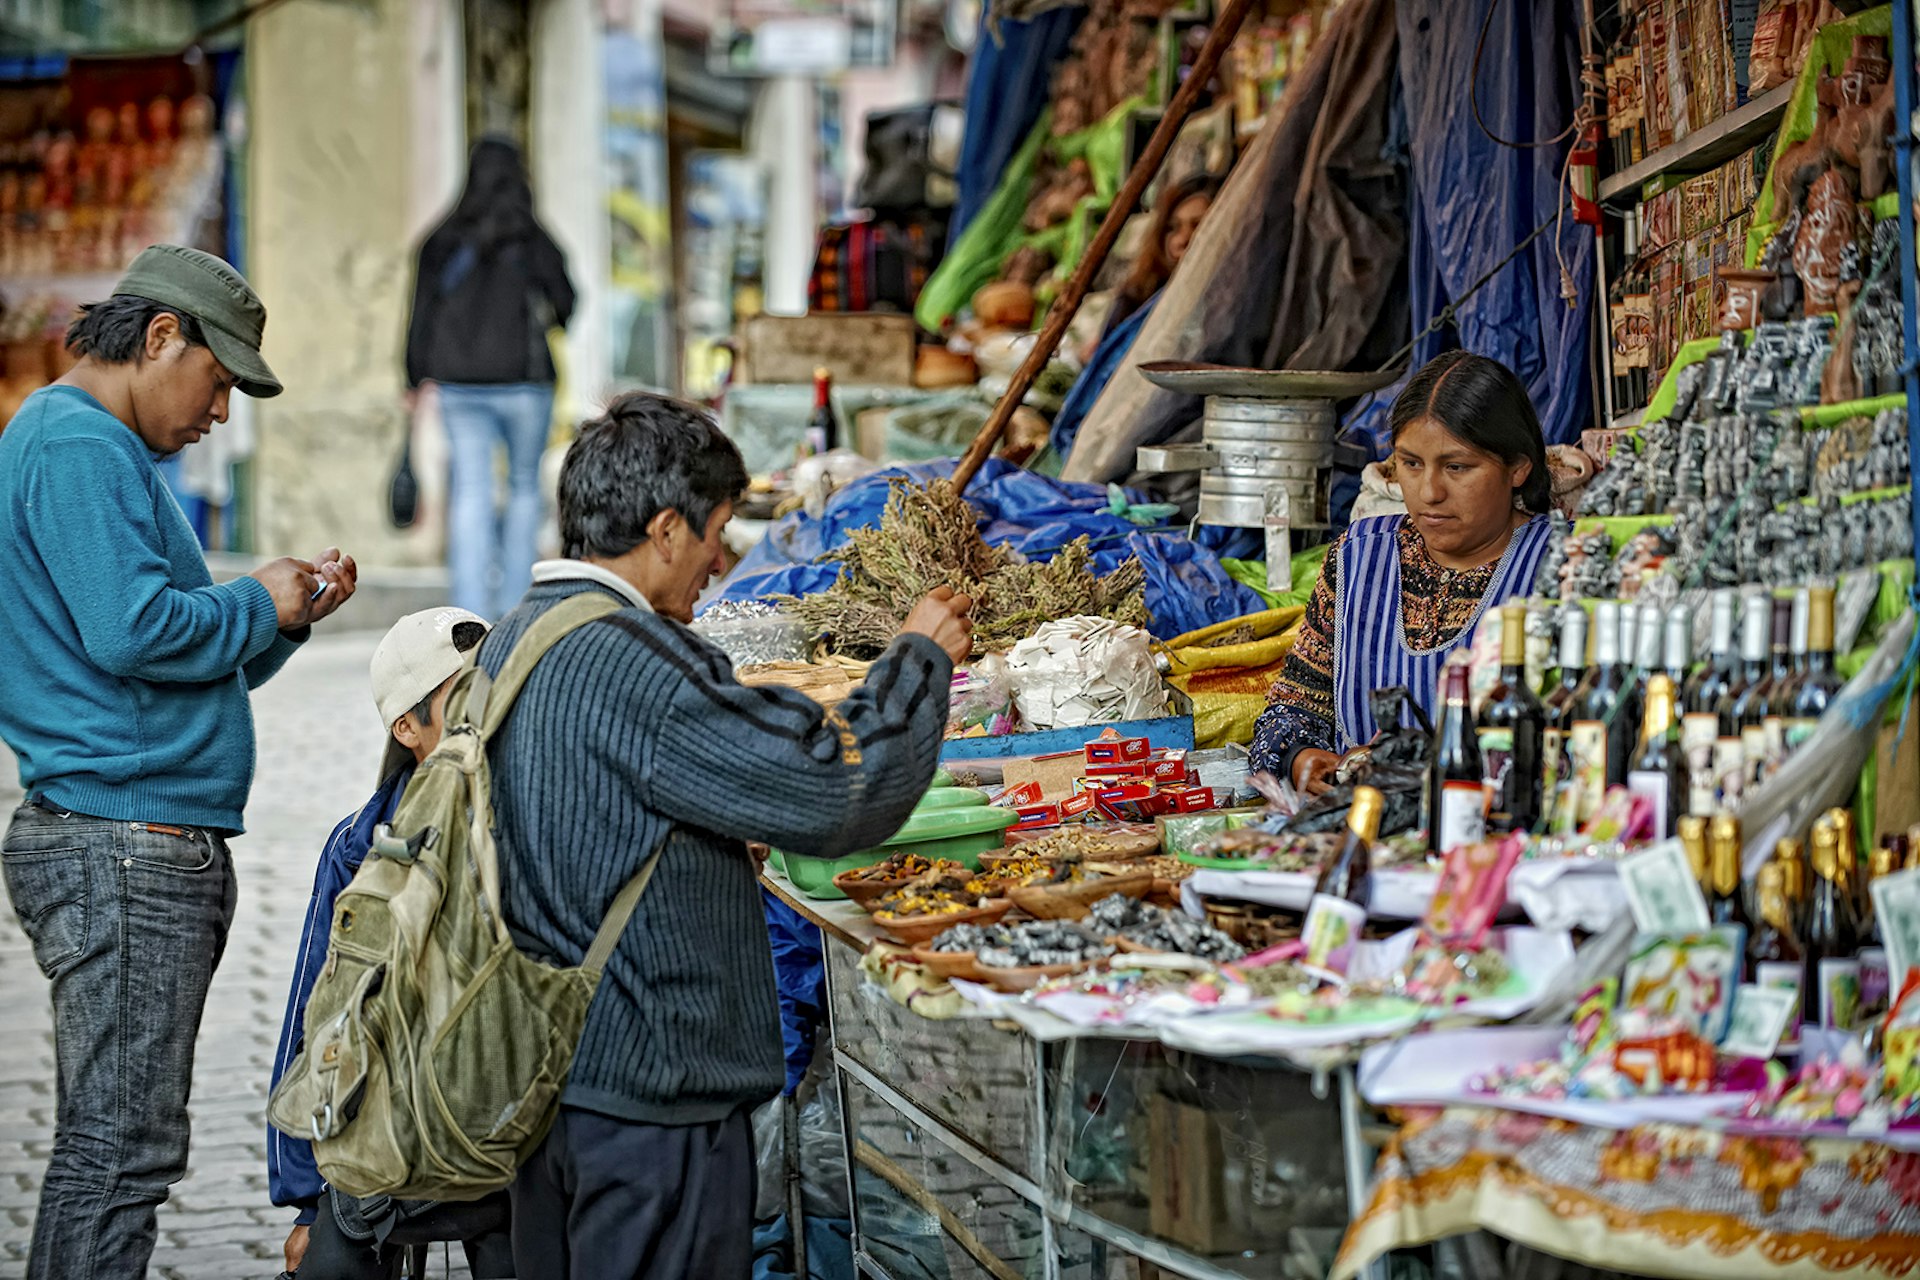 A vendor at the Mercado de las Brujas talks with a man about her wares. The stall is lined with talismans and herbs. La Paz, Bolivia.